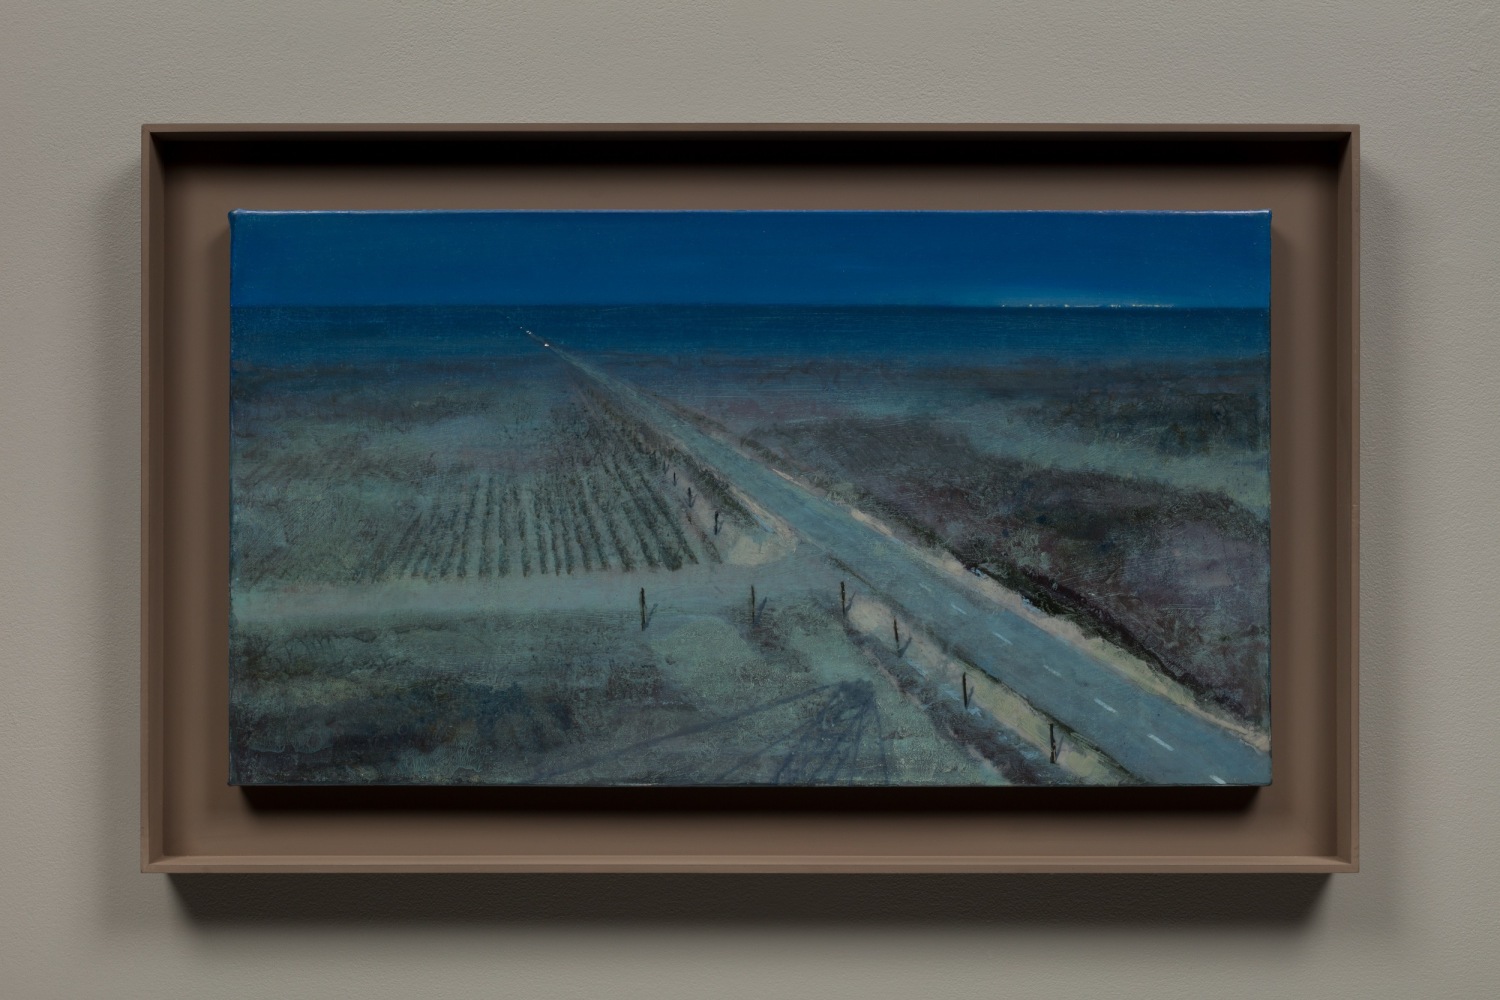 Full Moon Above Prairie Stop Hwy 41 (Mass MoCA # 289), 2018
polished mixed media on canvas
16 1/2 x 30 in. / 41.9 x 76.2 cm
framed: 21 1/2 x 35 x 2 in. /&amp;nbsp;54.6 x 88.9 x 5.1 cm